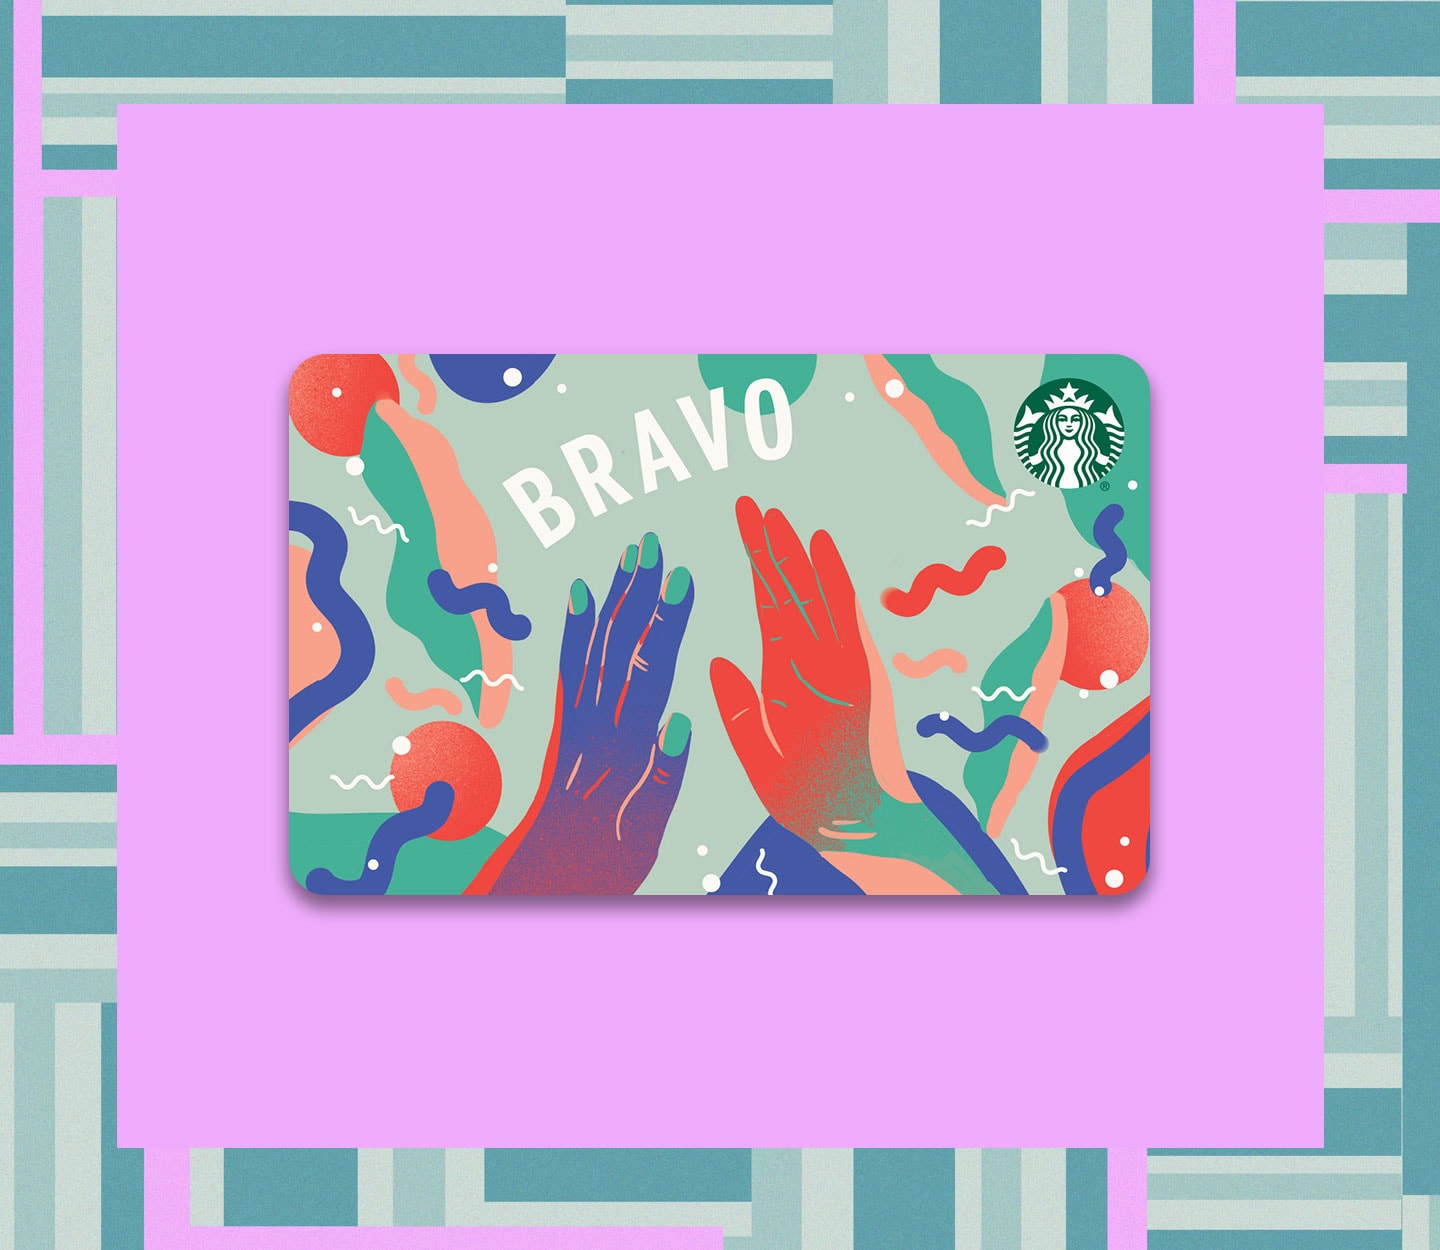 A gift card with the words “Above+Beyond=You” positioned over wavy, graphic lines.